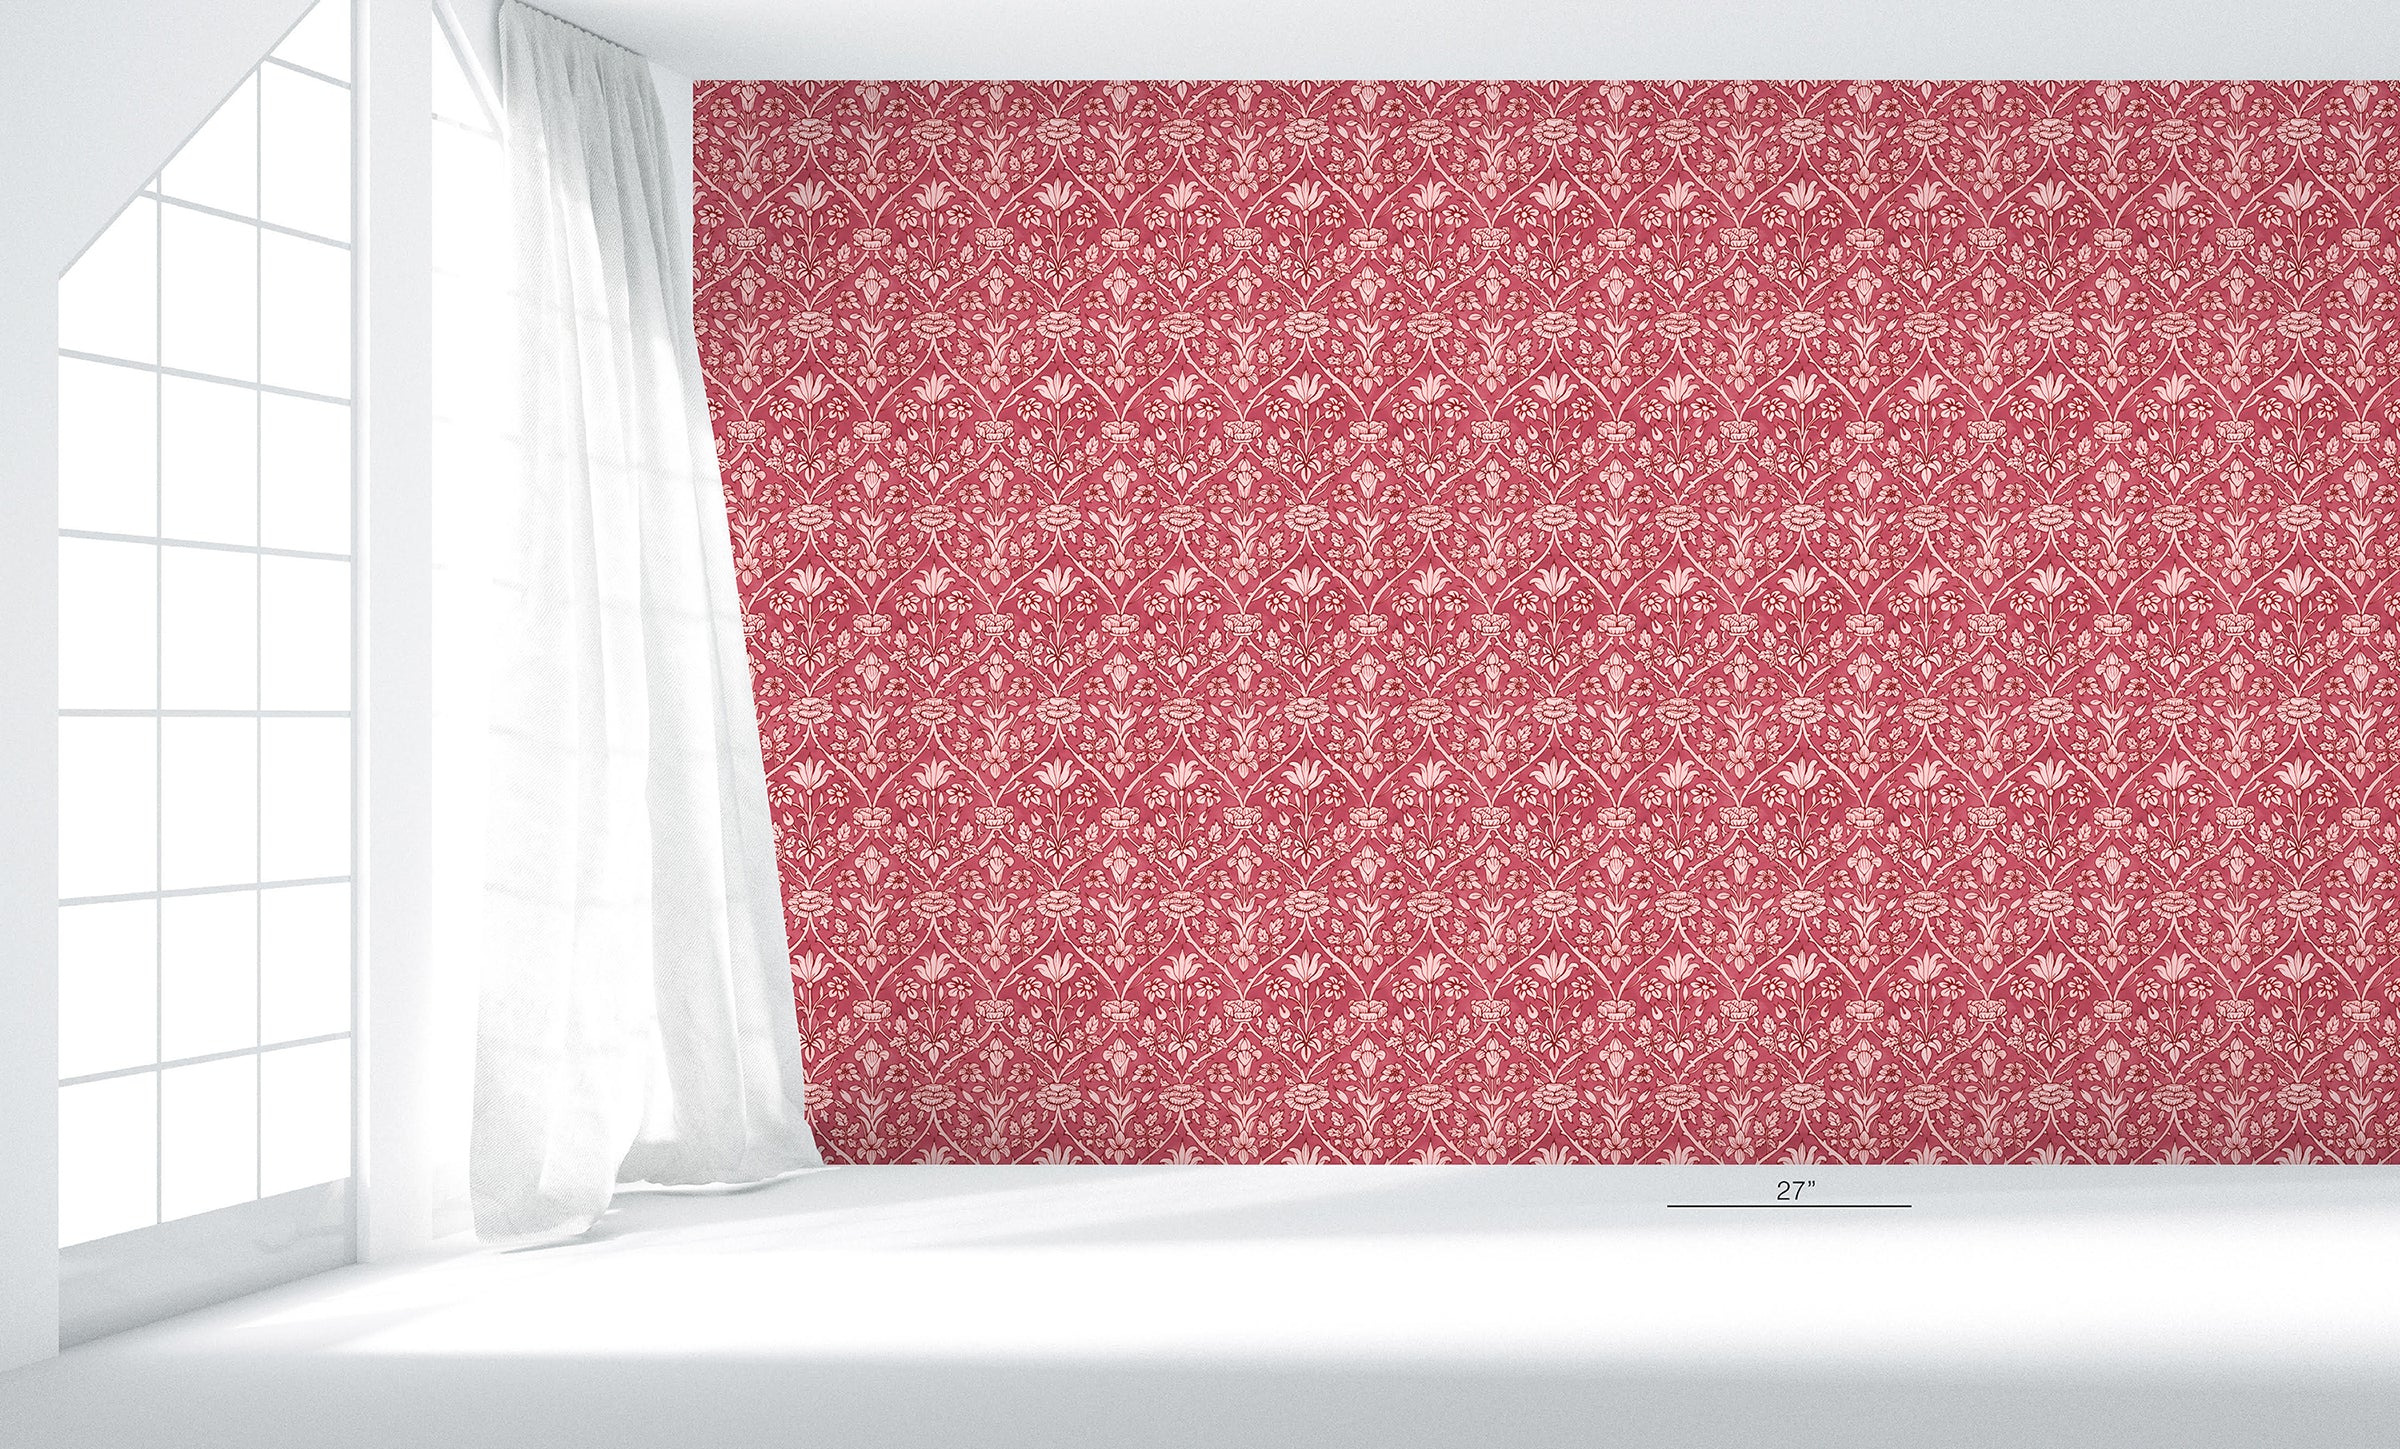 Trumpet Blooms Red and Pink Wallpaper